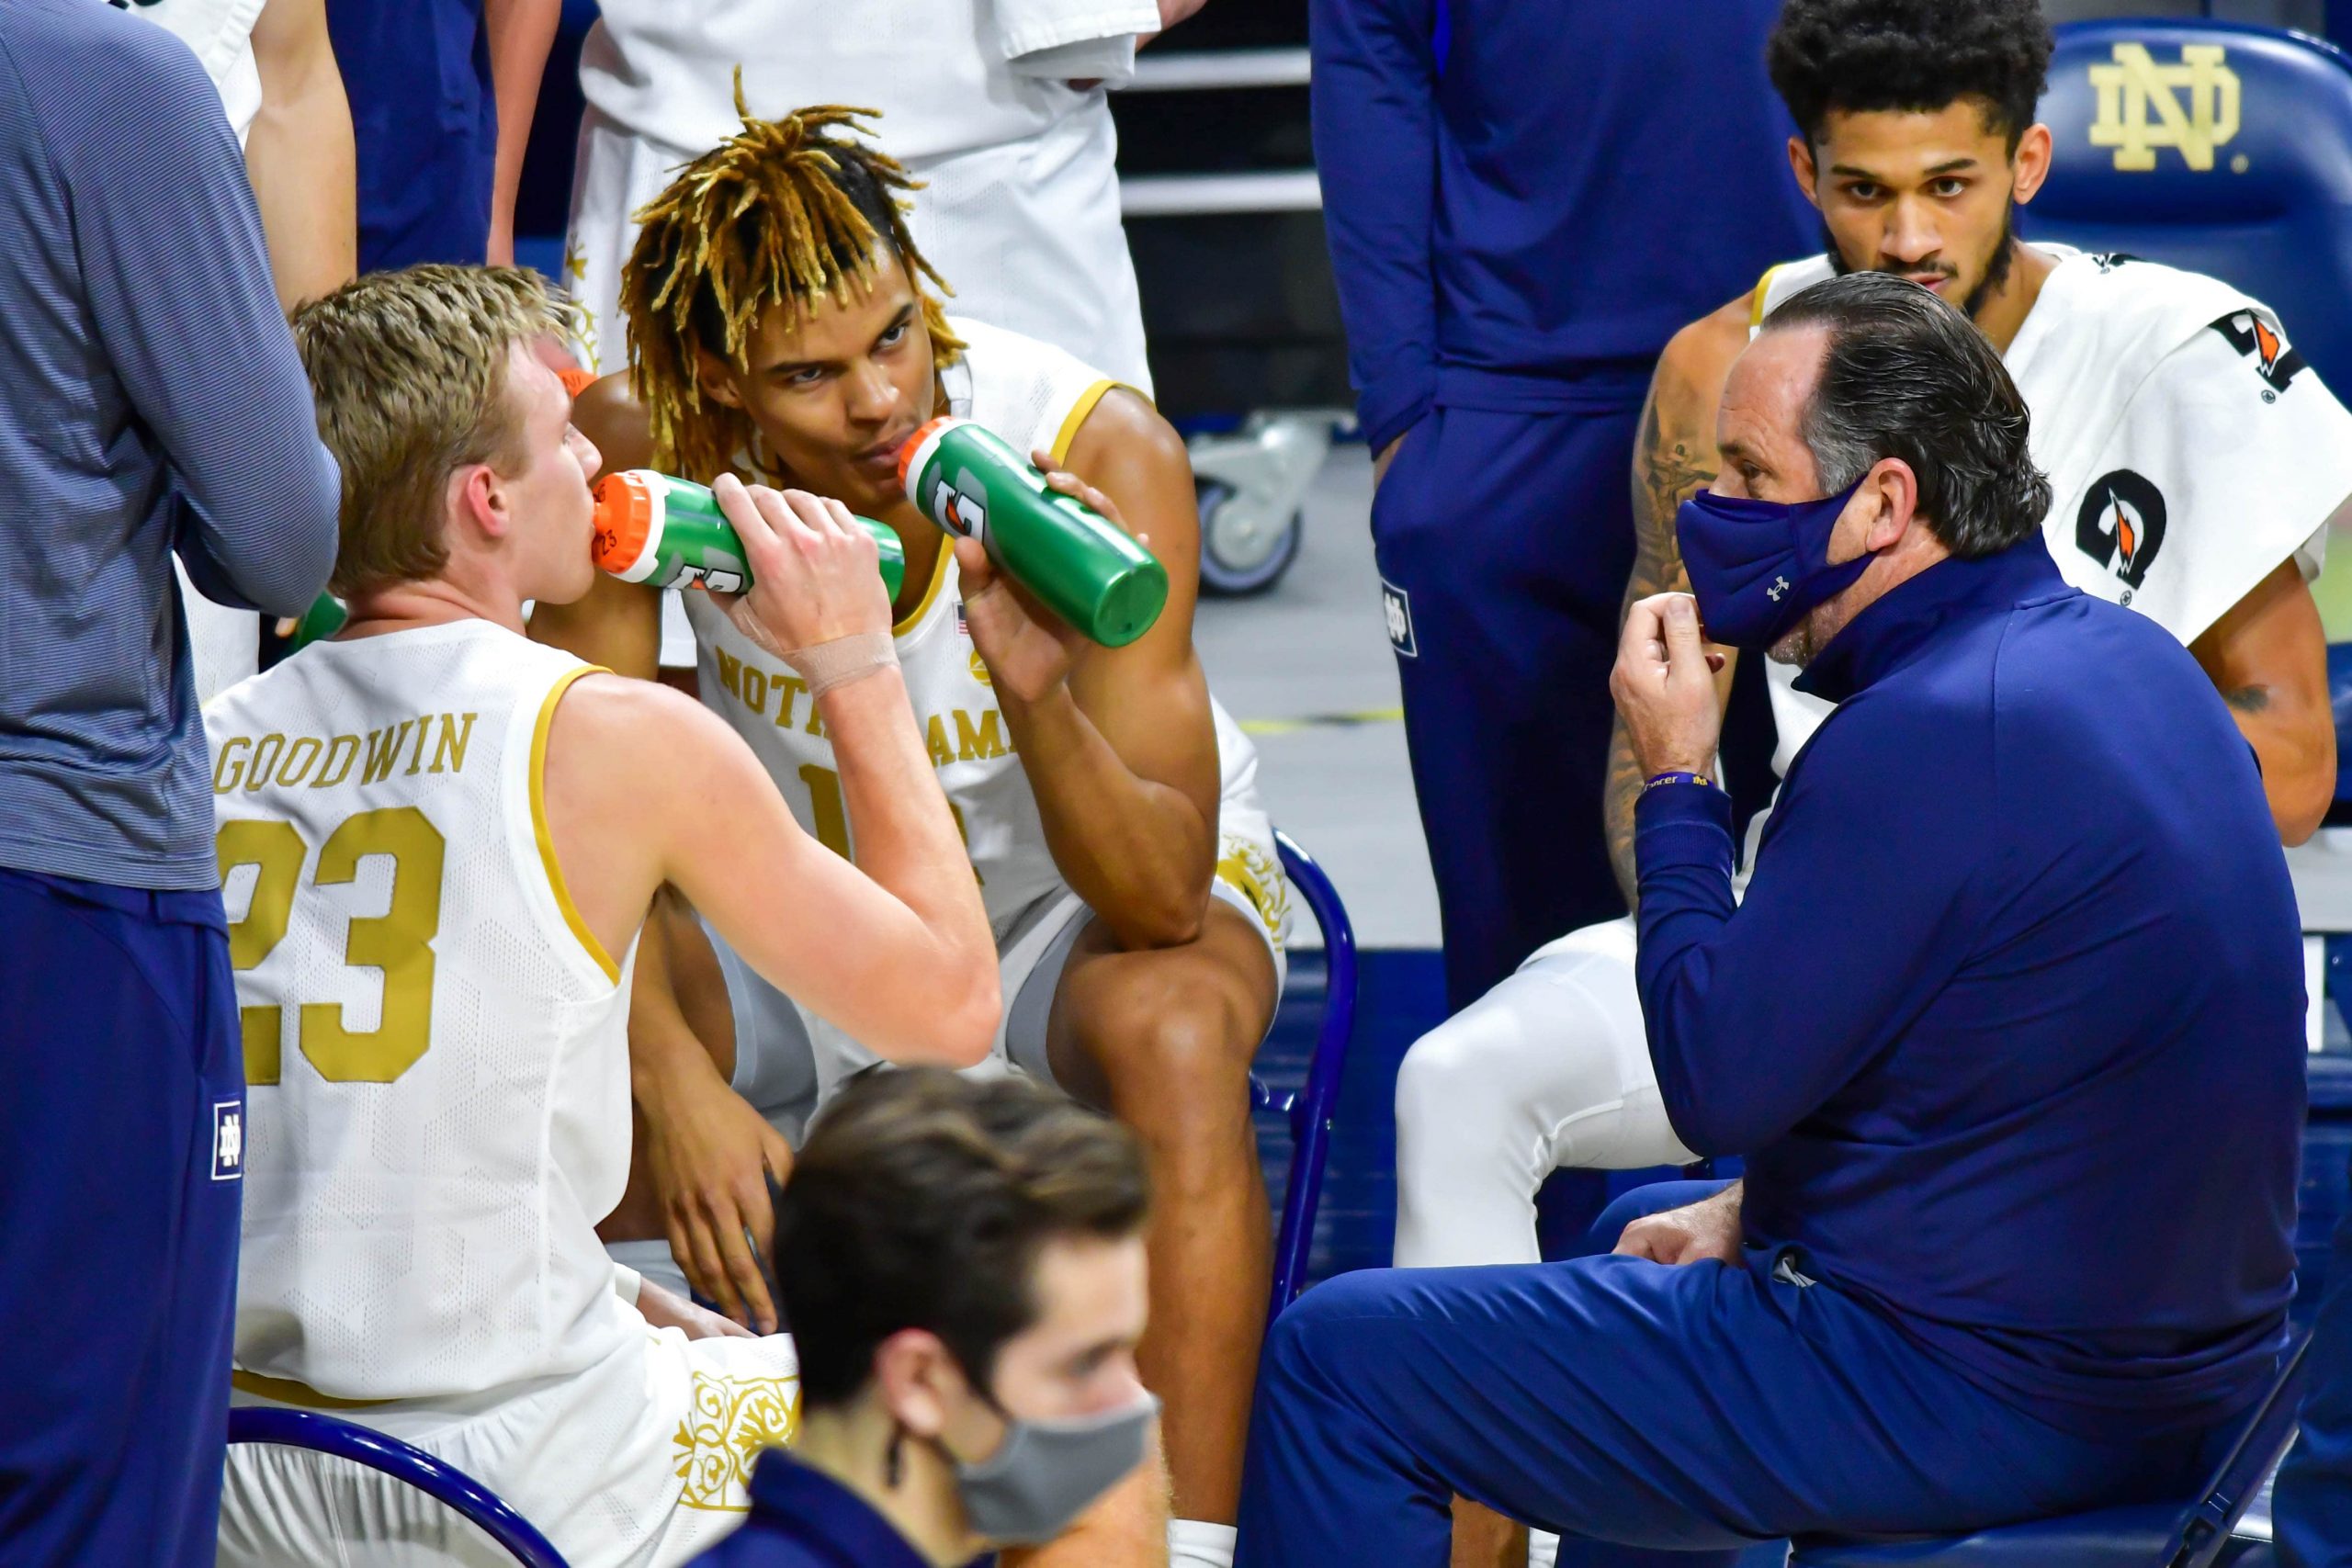 Notre Dame Fighting Irish head coach Mike Brey talks to players during timeout in game against Ohio State